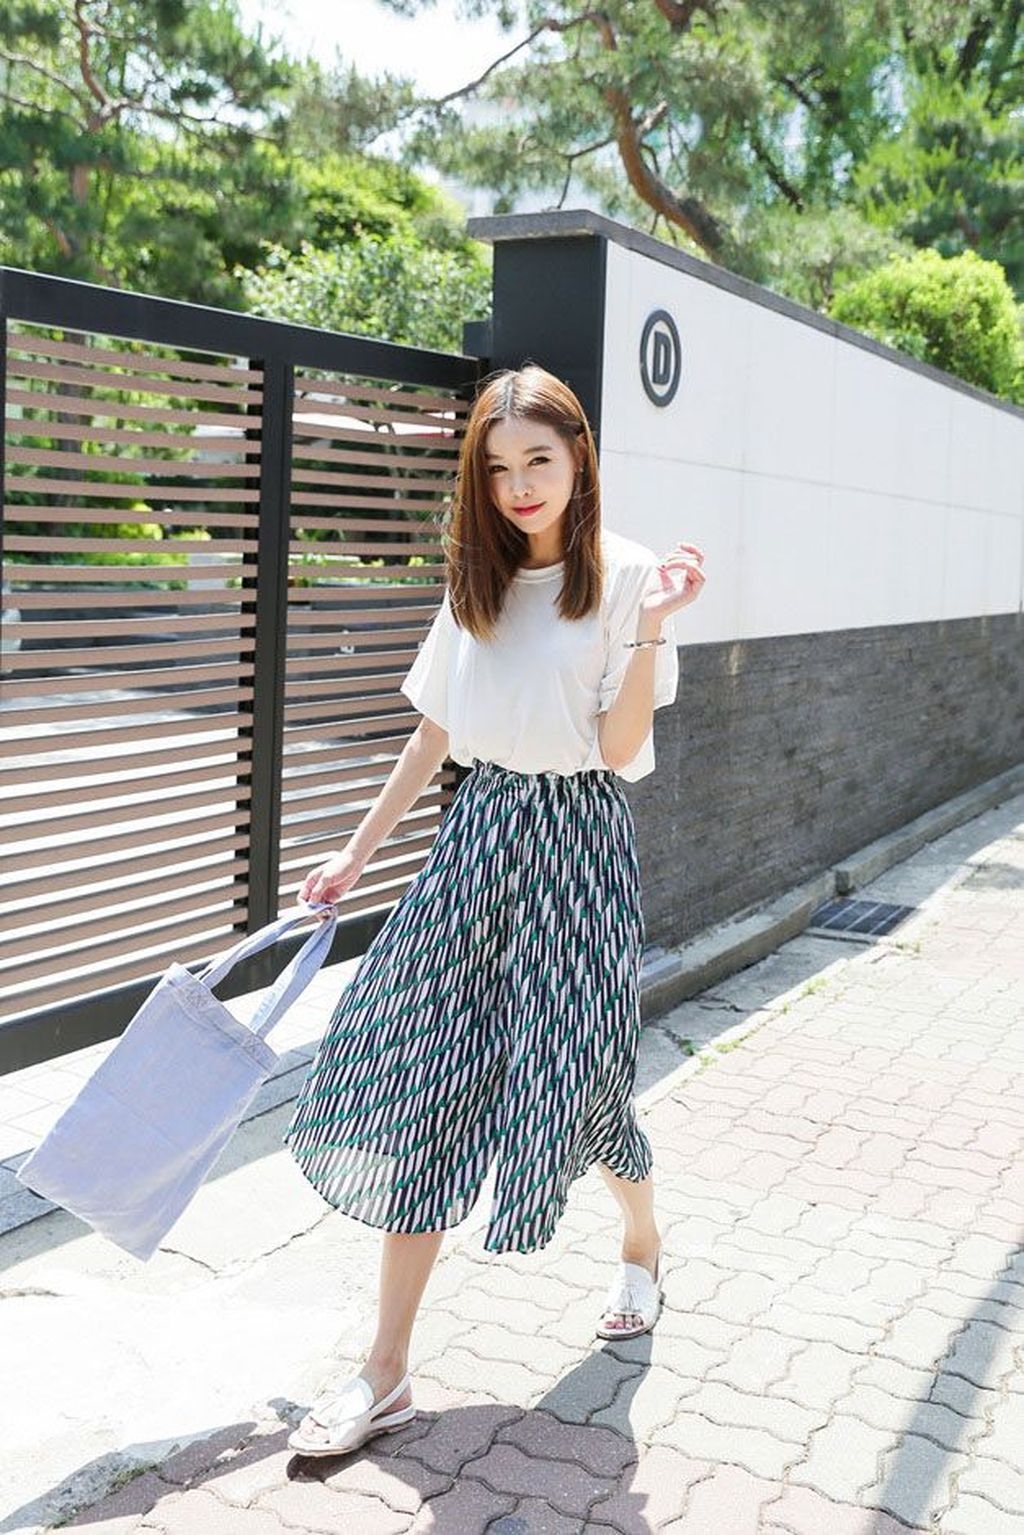 https://image-us.24h.com.vn/upload/2-2020/images/2020-05-27/Khong-con-best-trends-to-dress-casual-on-summer03-1590567566-686-width1024height1535.jpg